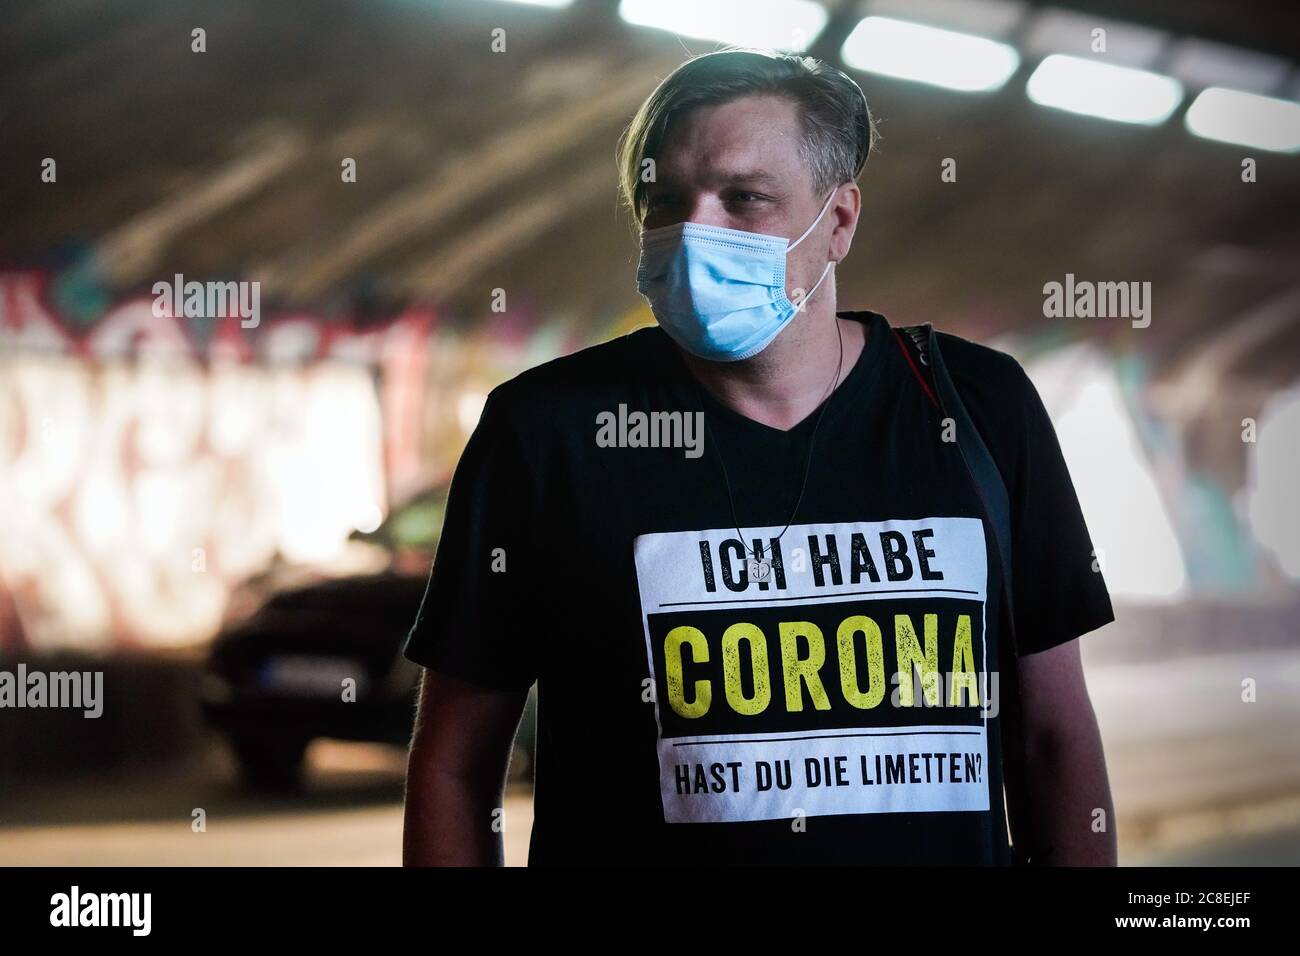 Duisburg, Germany, July 23rd, 2020: Man with a face mask is wearing a t-shirt that says "I have Corona, do you have limes?". This does not mean the virus Covid-19, but the Mexican beer brand Corona, which is drunk with lime in the bottle neck. Stock Photo